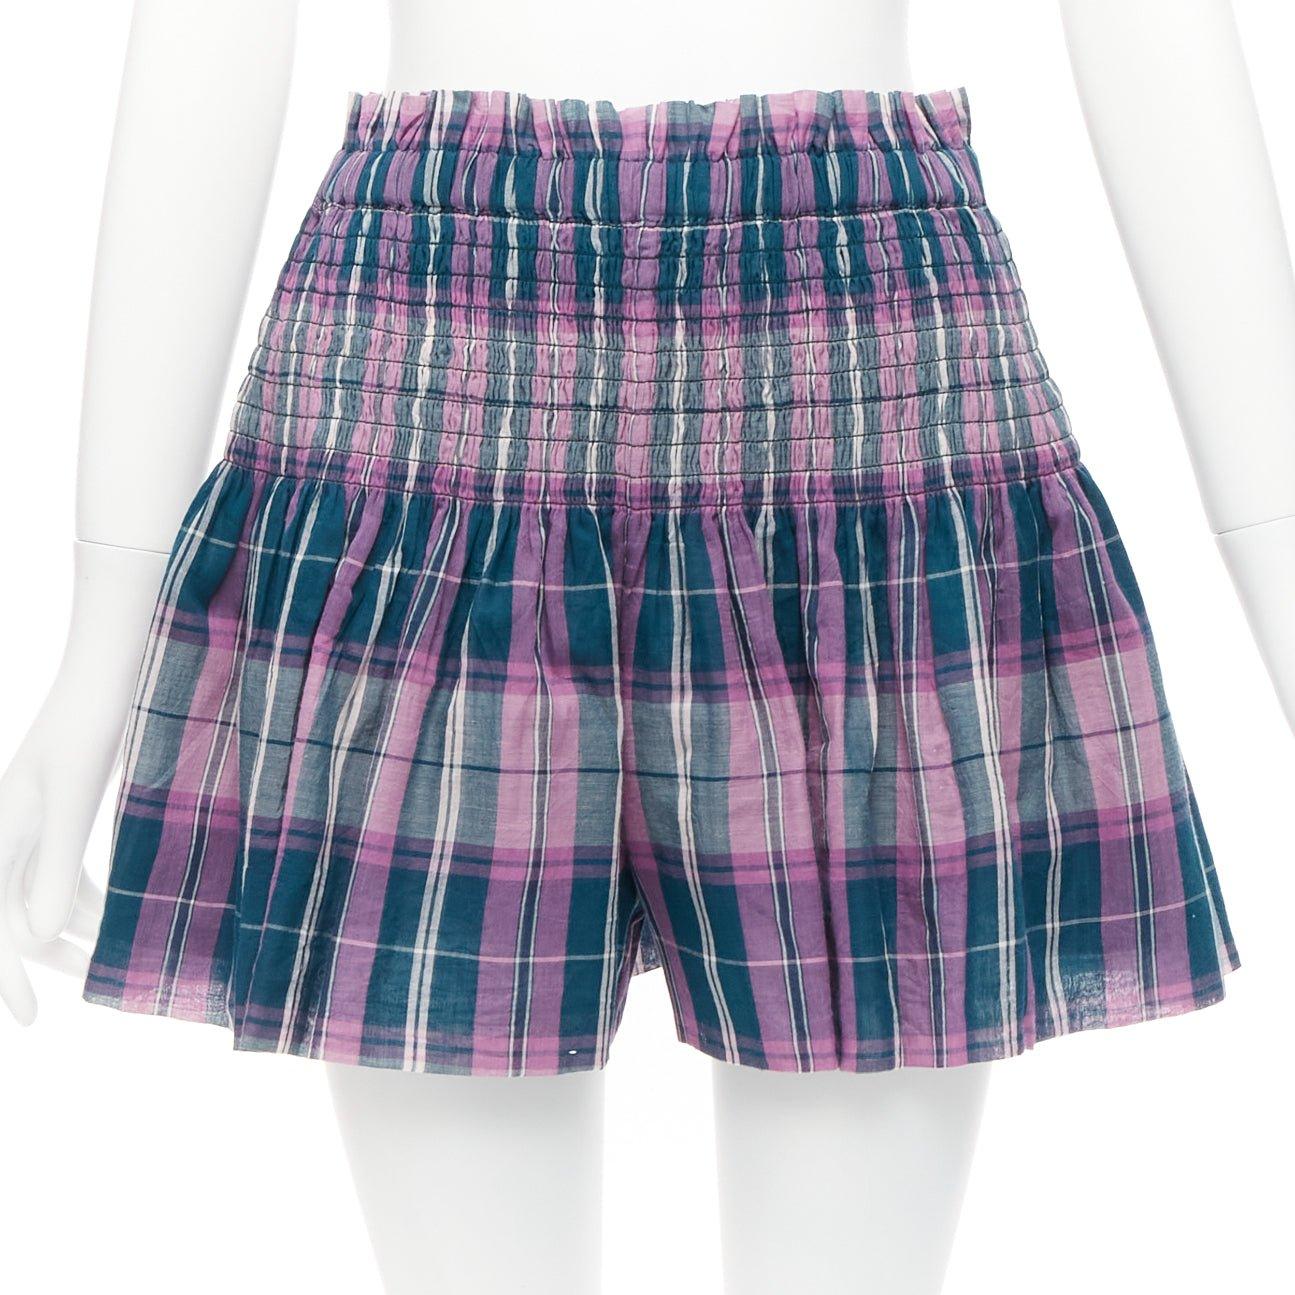 ISABEL MARANT ETOILE Bethany purple cotton check top FR34 XS shorts FR36 S set For Sale 4